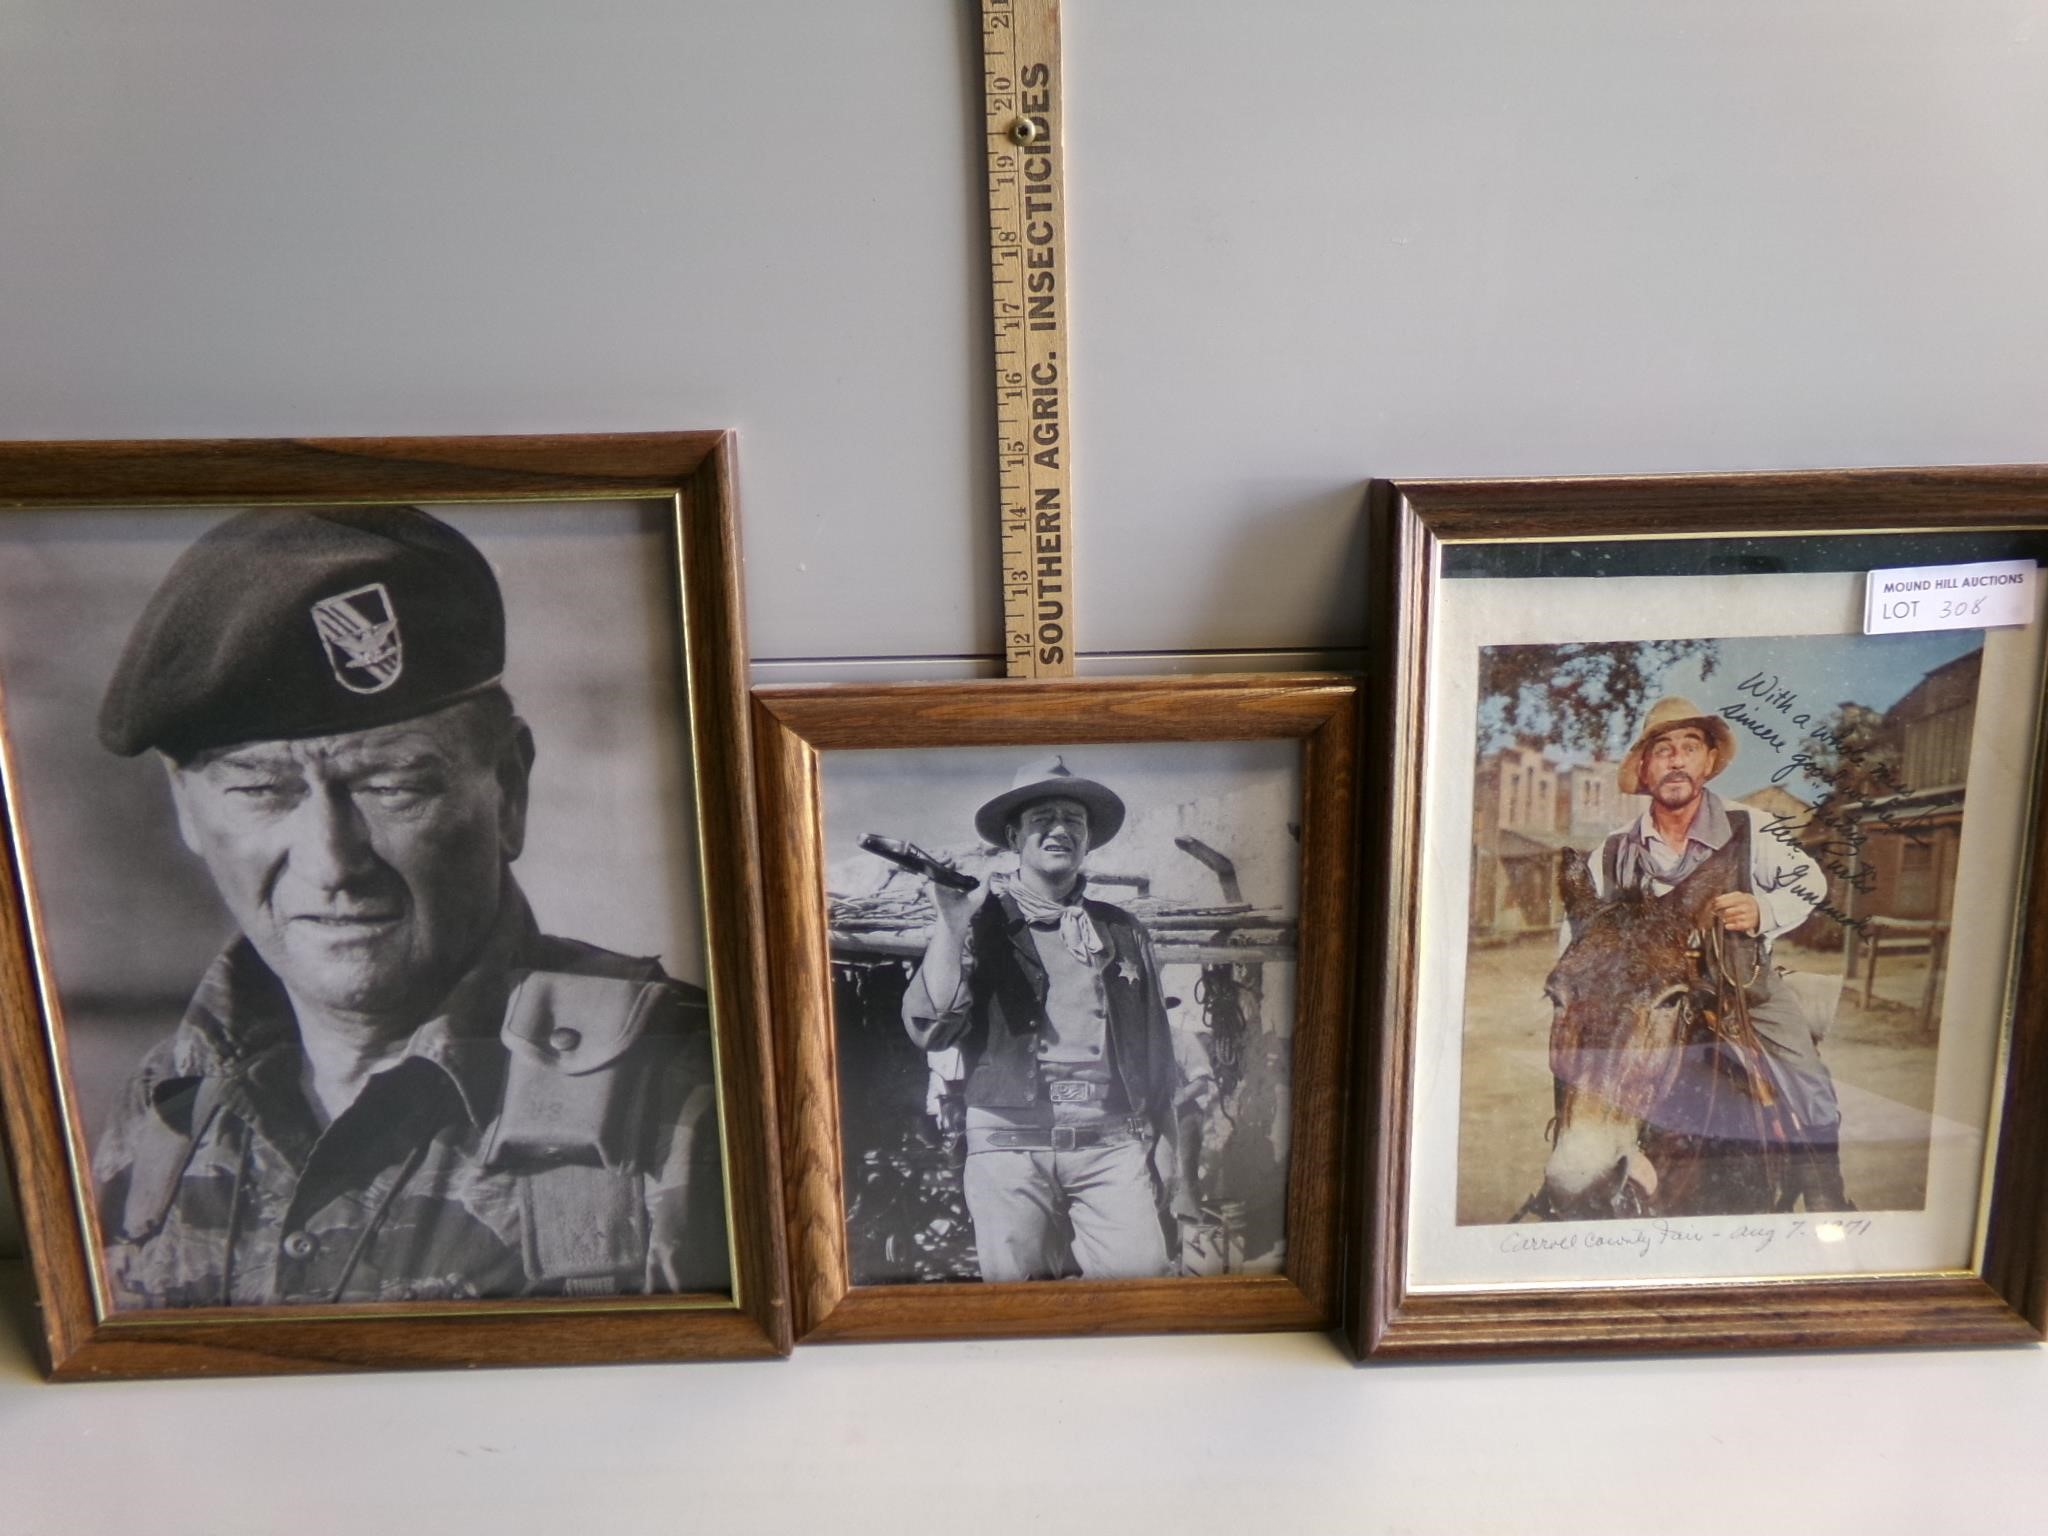 2 John Wayne pictures and 1 other